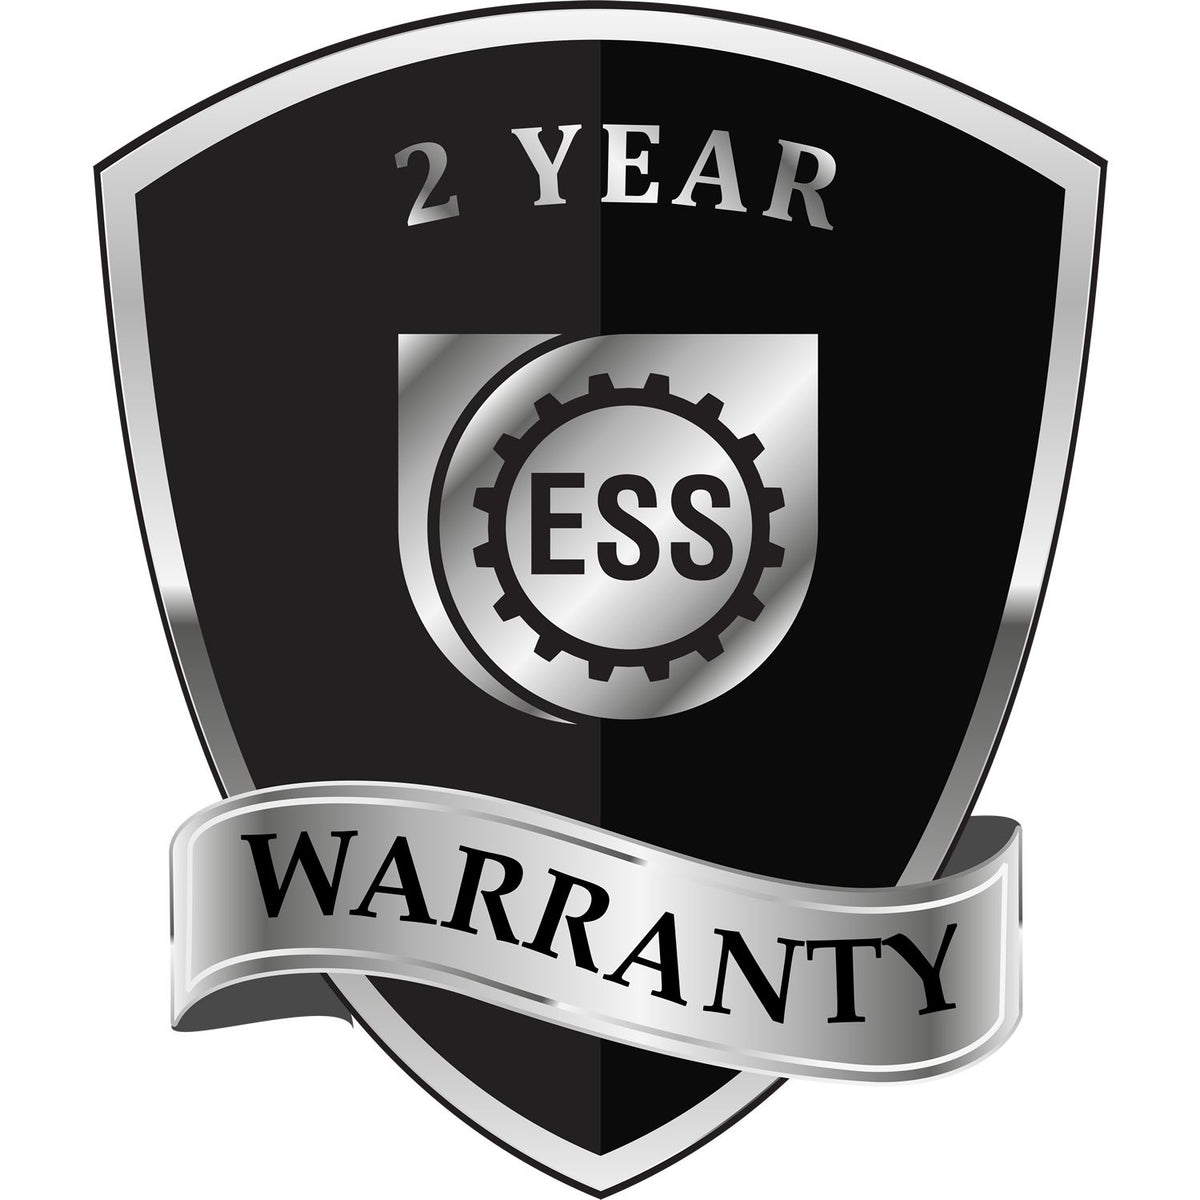 A black and silver badge or emblem showing warranty information for the Long Reach Wisconsin Geology Seal